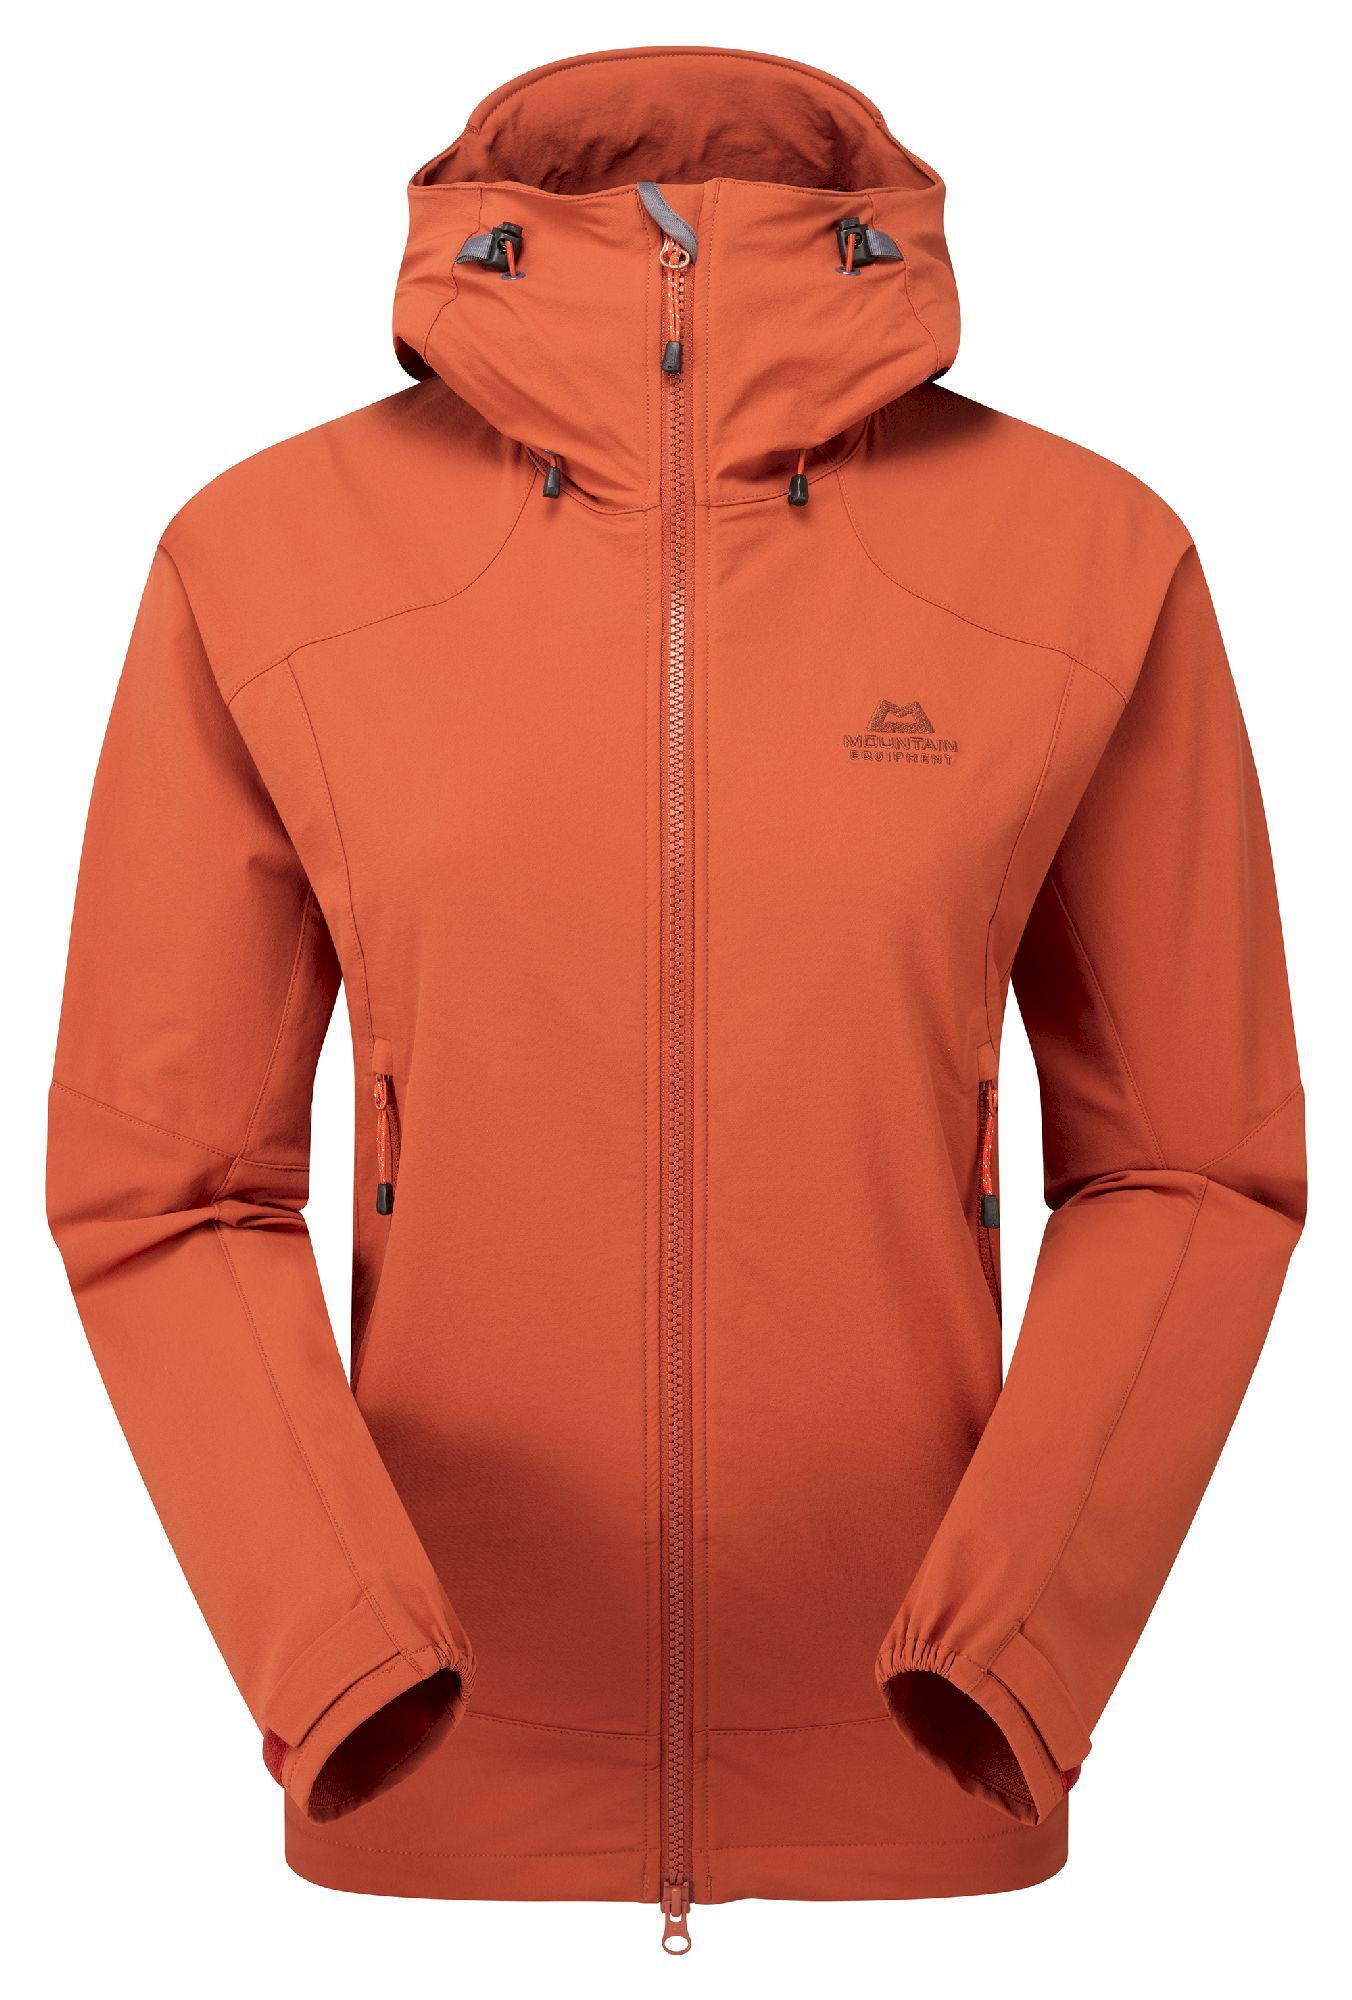 Mountain Equipment Frontier Hooded Jacket - Giacca softshell - Donna | Hardloop